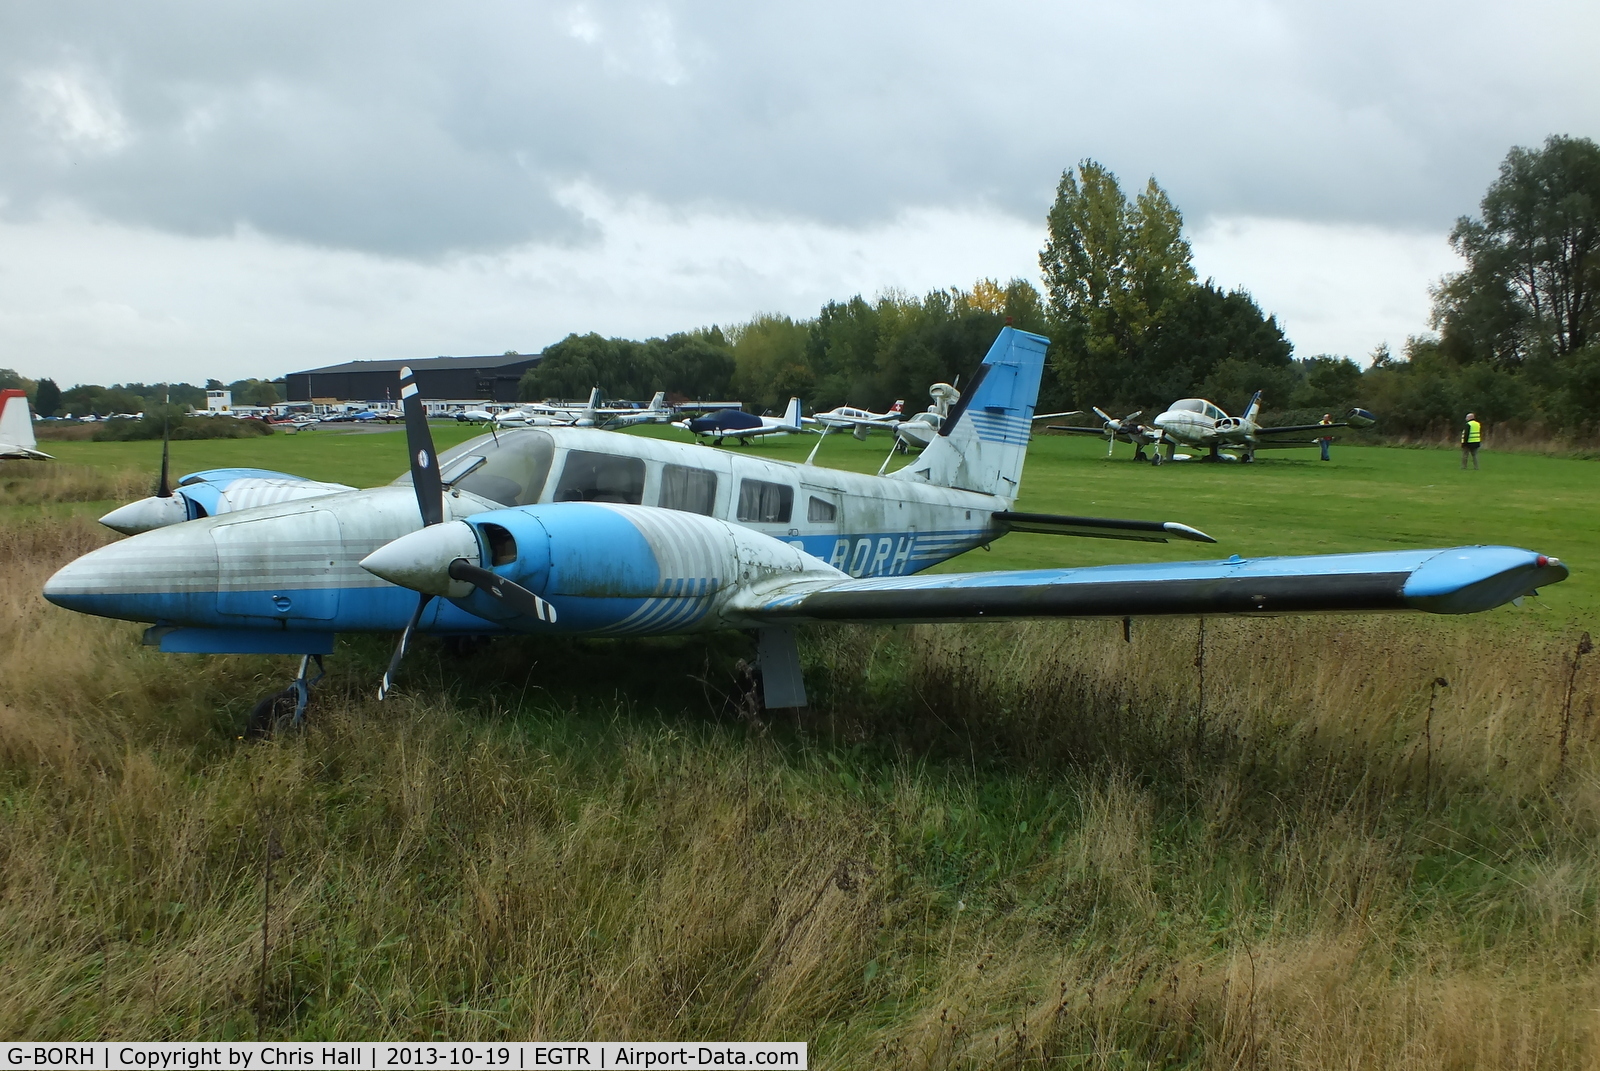 G-BORH, 1980 Piper PA-34-200T Seneca II C/N 34-8070352, now parked with the other wrecks & relics at Elstree